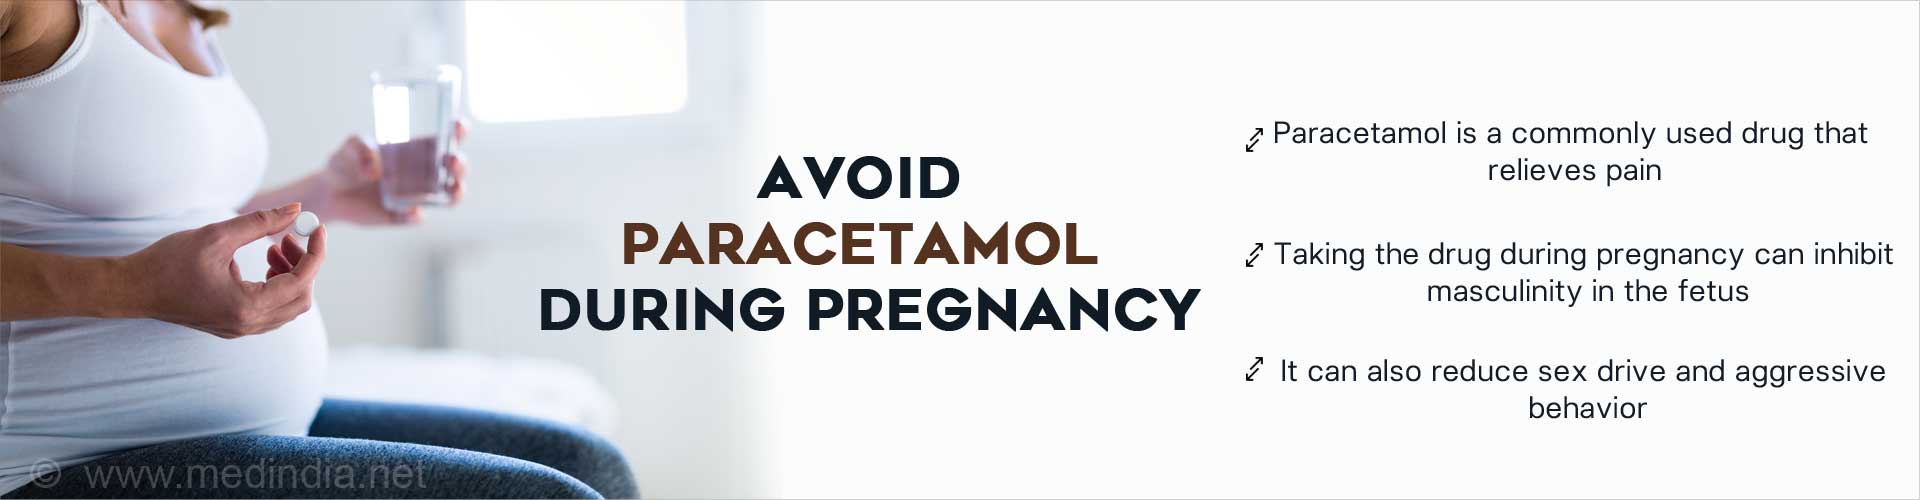 Avoid paracetamol during pregnancy
- Paracetamol is a commonly used drug that relieves pain
- Taking the drug during pregnancy can inhibit masculinity in the fetus
- It can also reduce sex drive and aggressive behavior